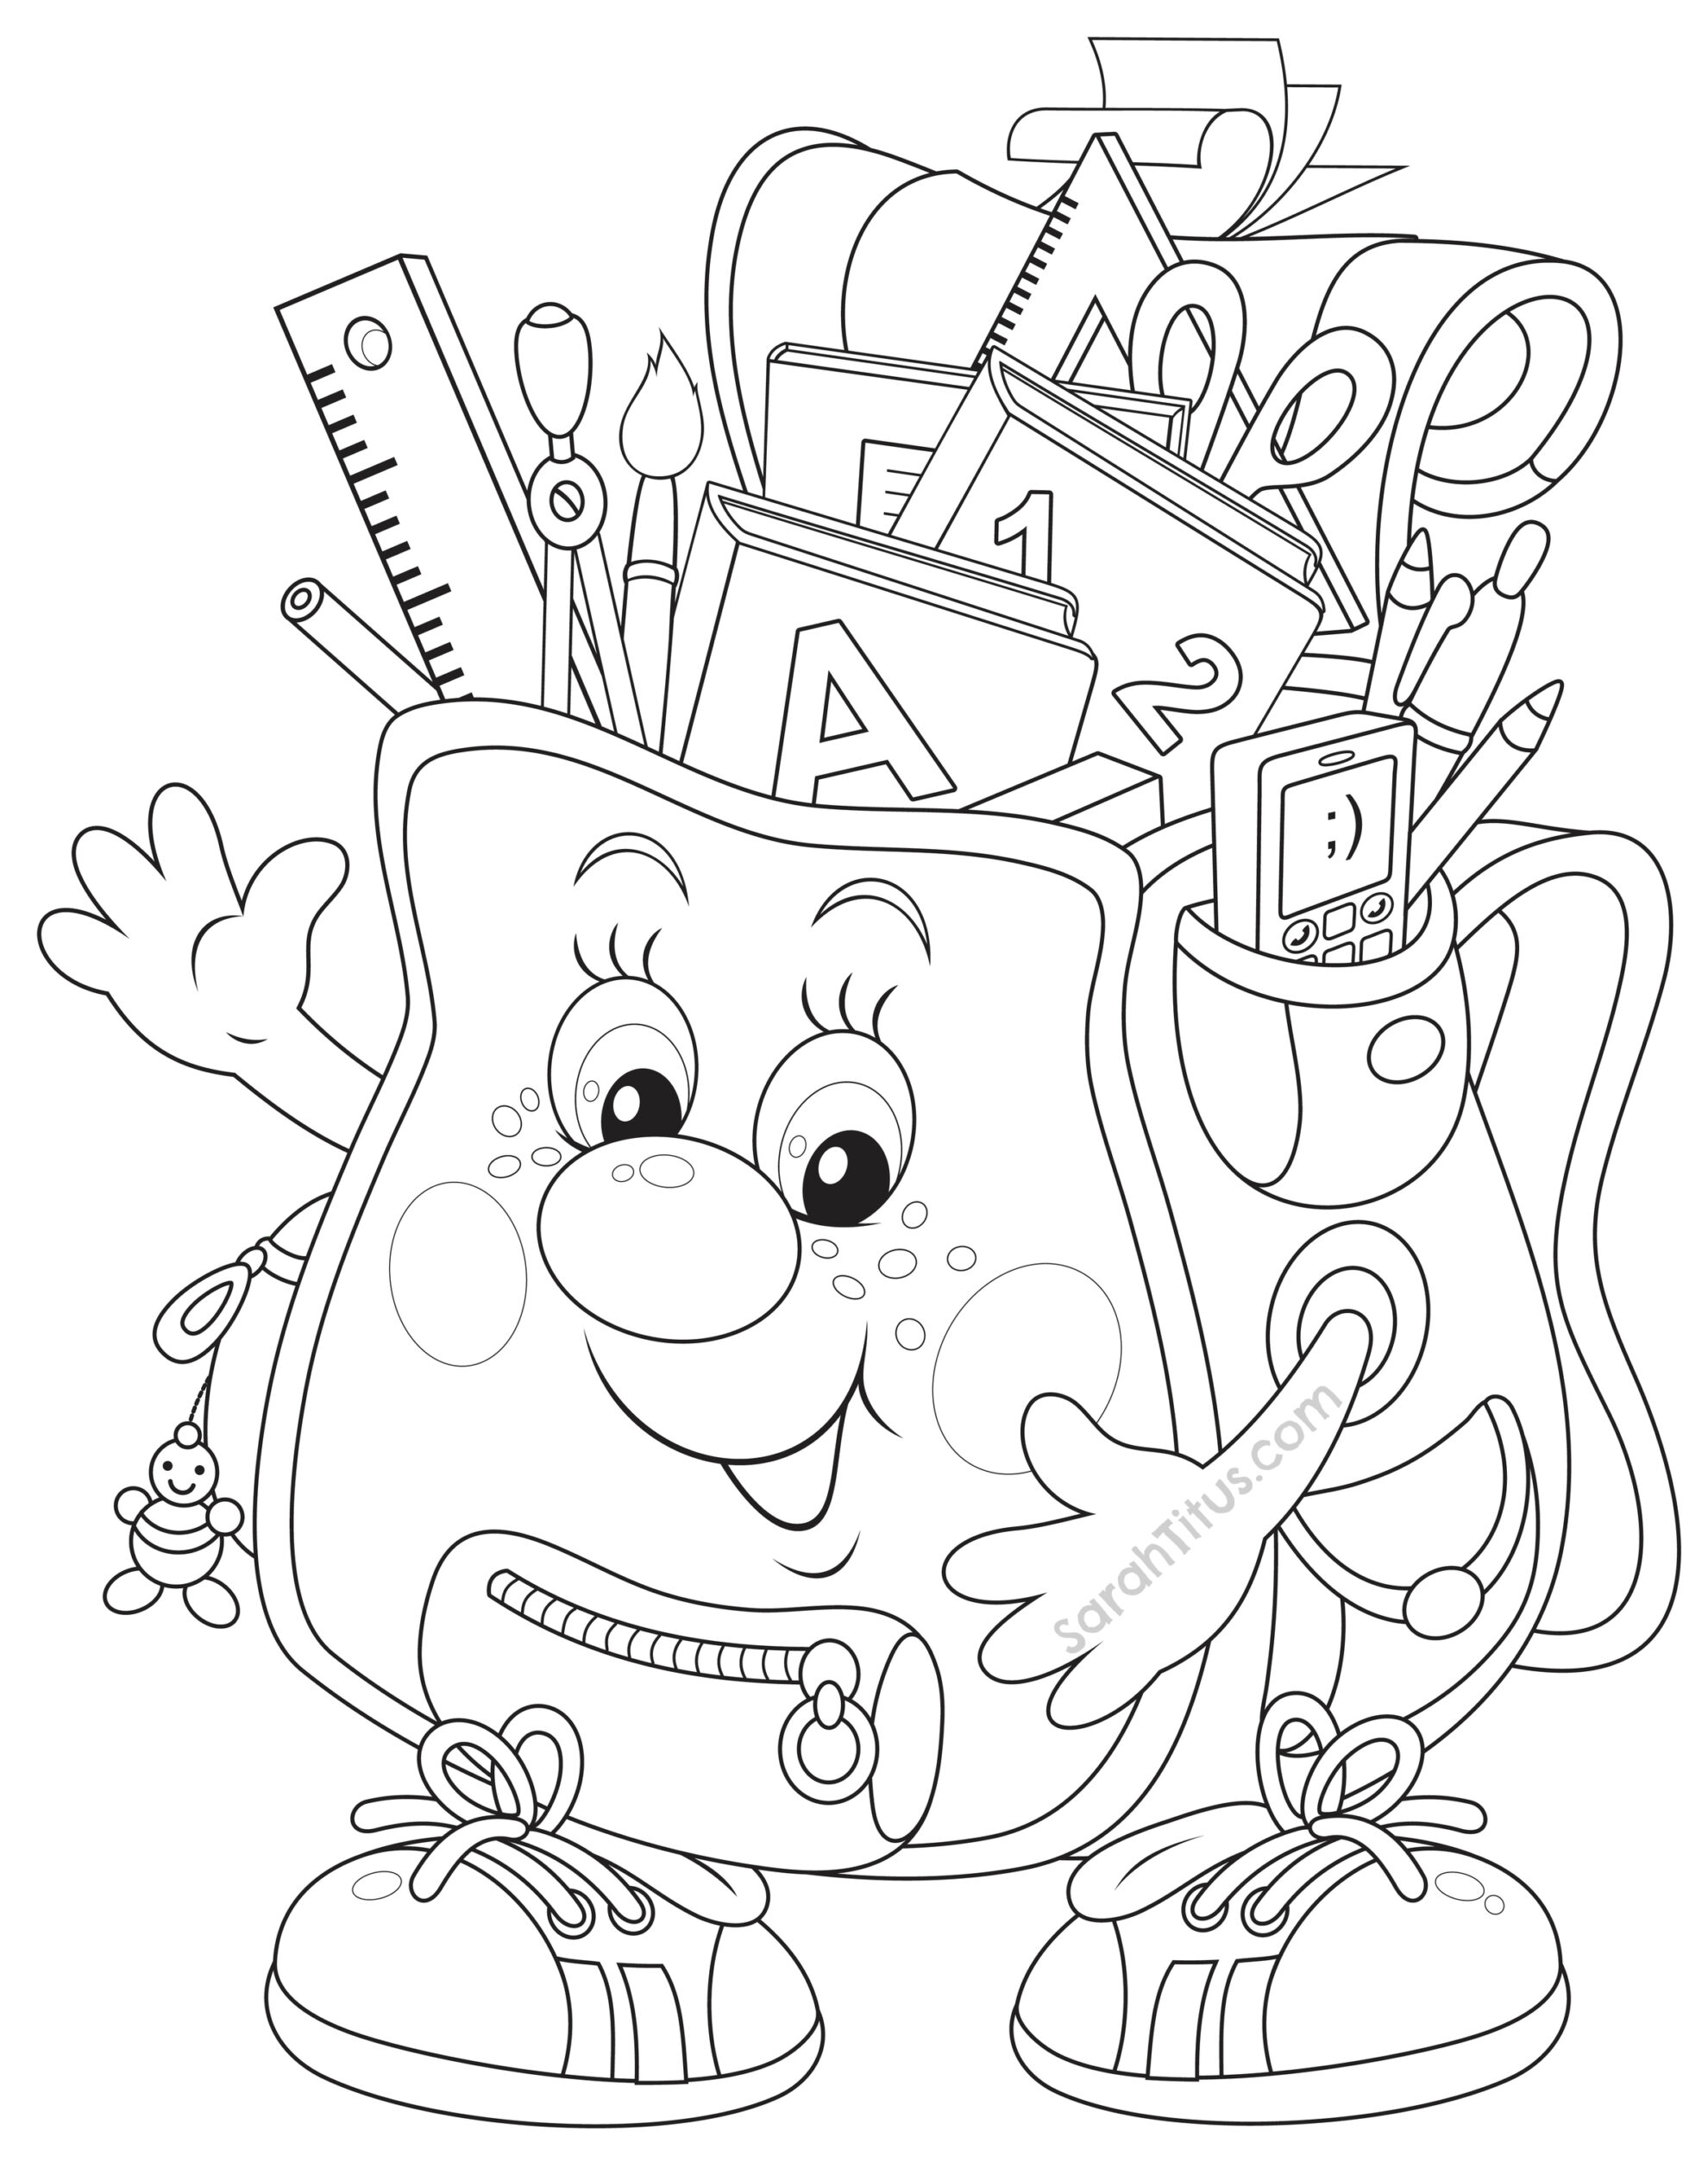 back-to-school-coloring-pages-sarah-titus